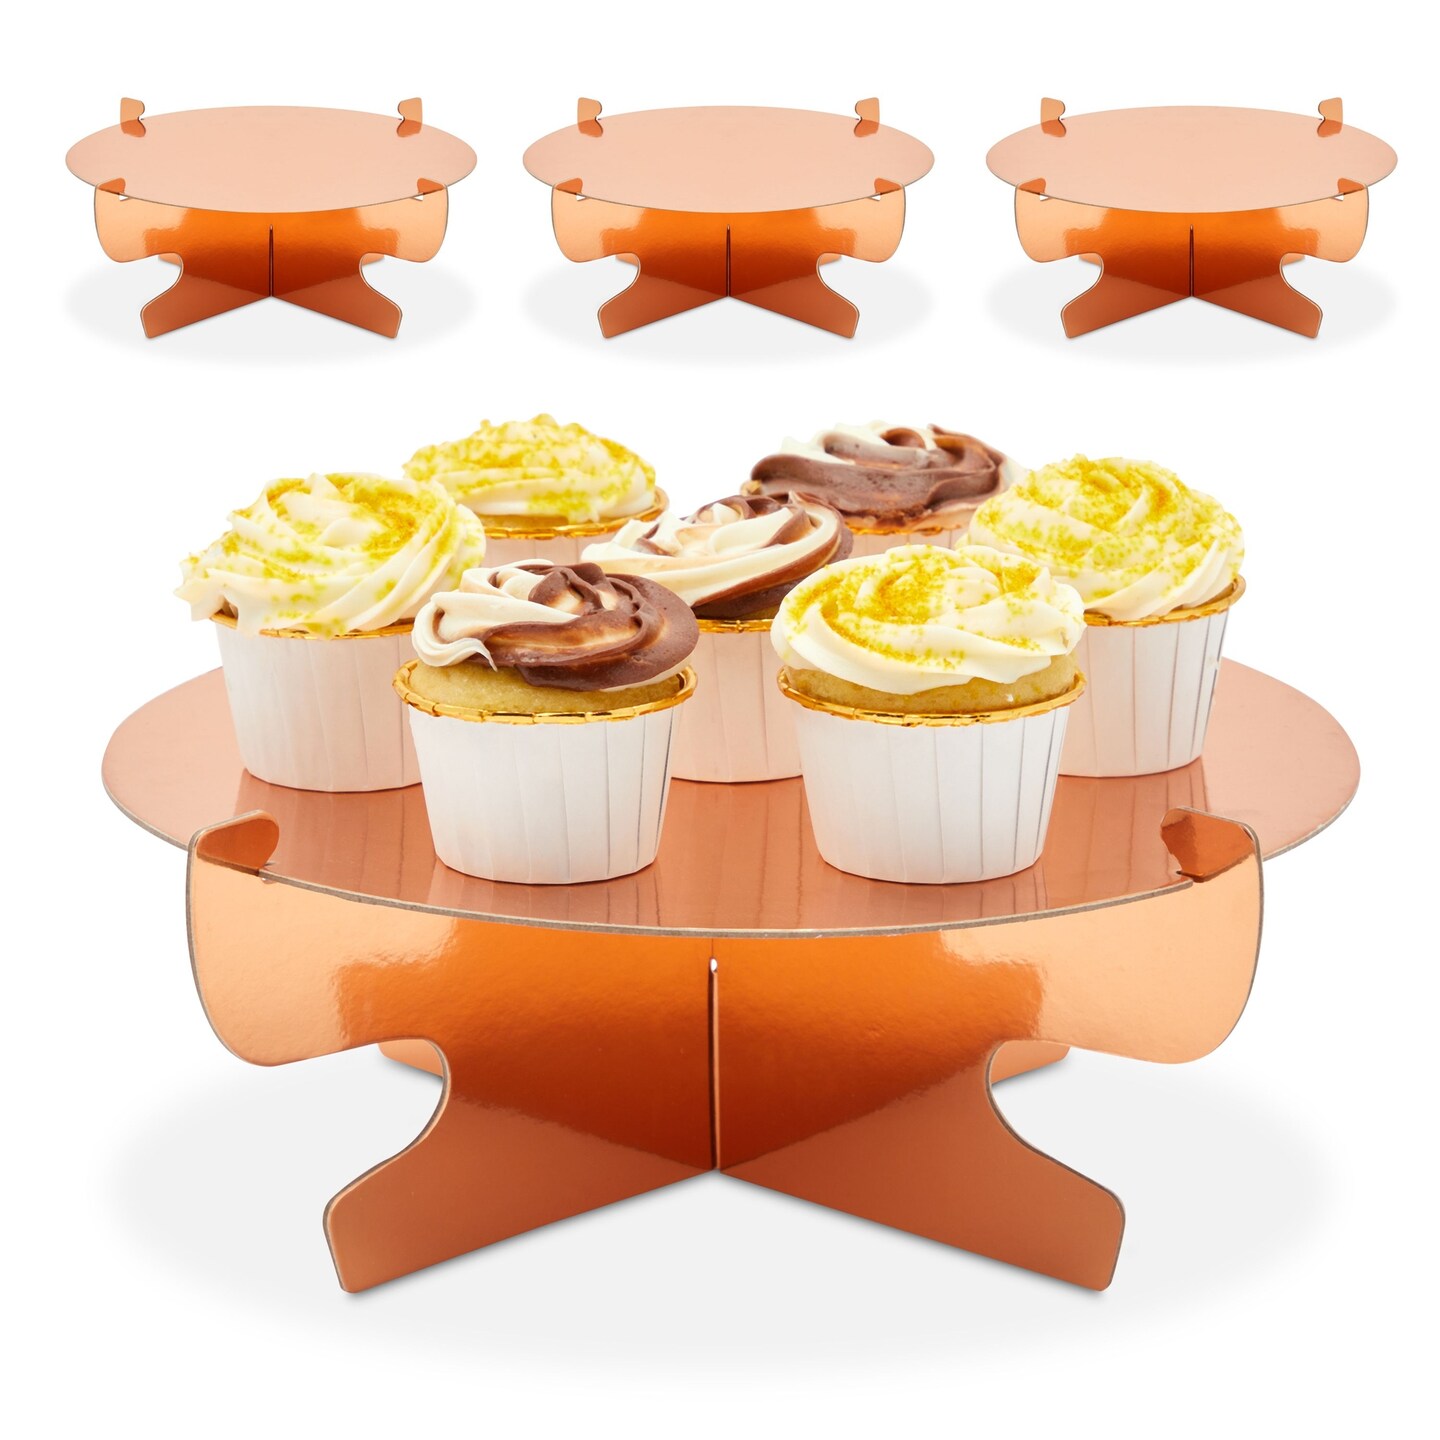 2 Tier Cupcake Carrier with Lid, Holds 24 Cupcakes (13.5 x 10.25 x 7.5 In)